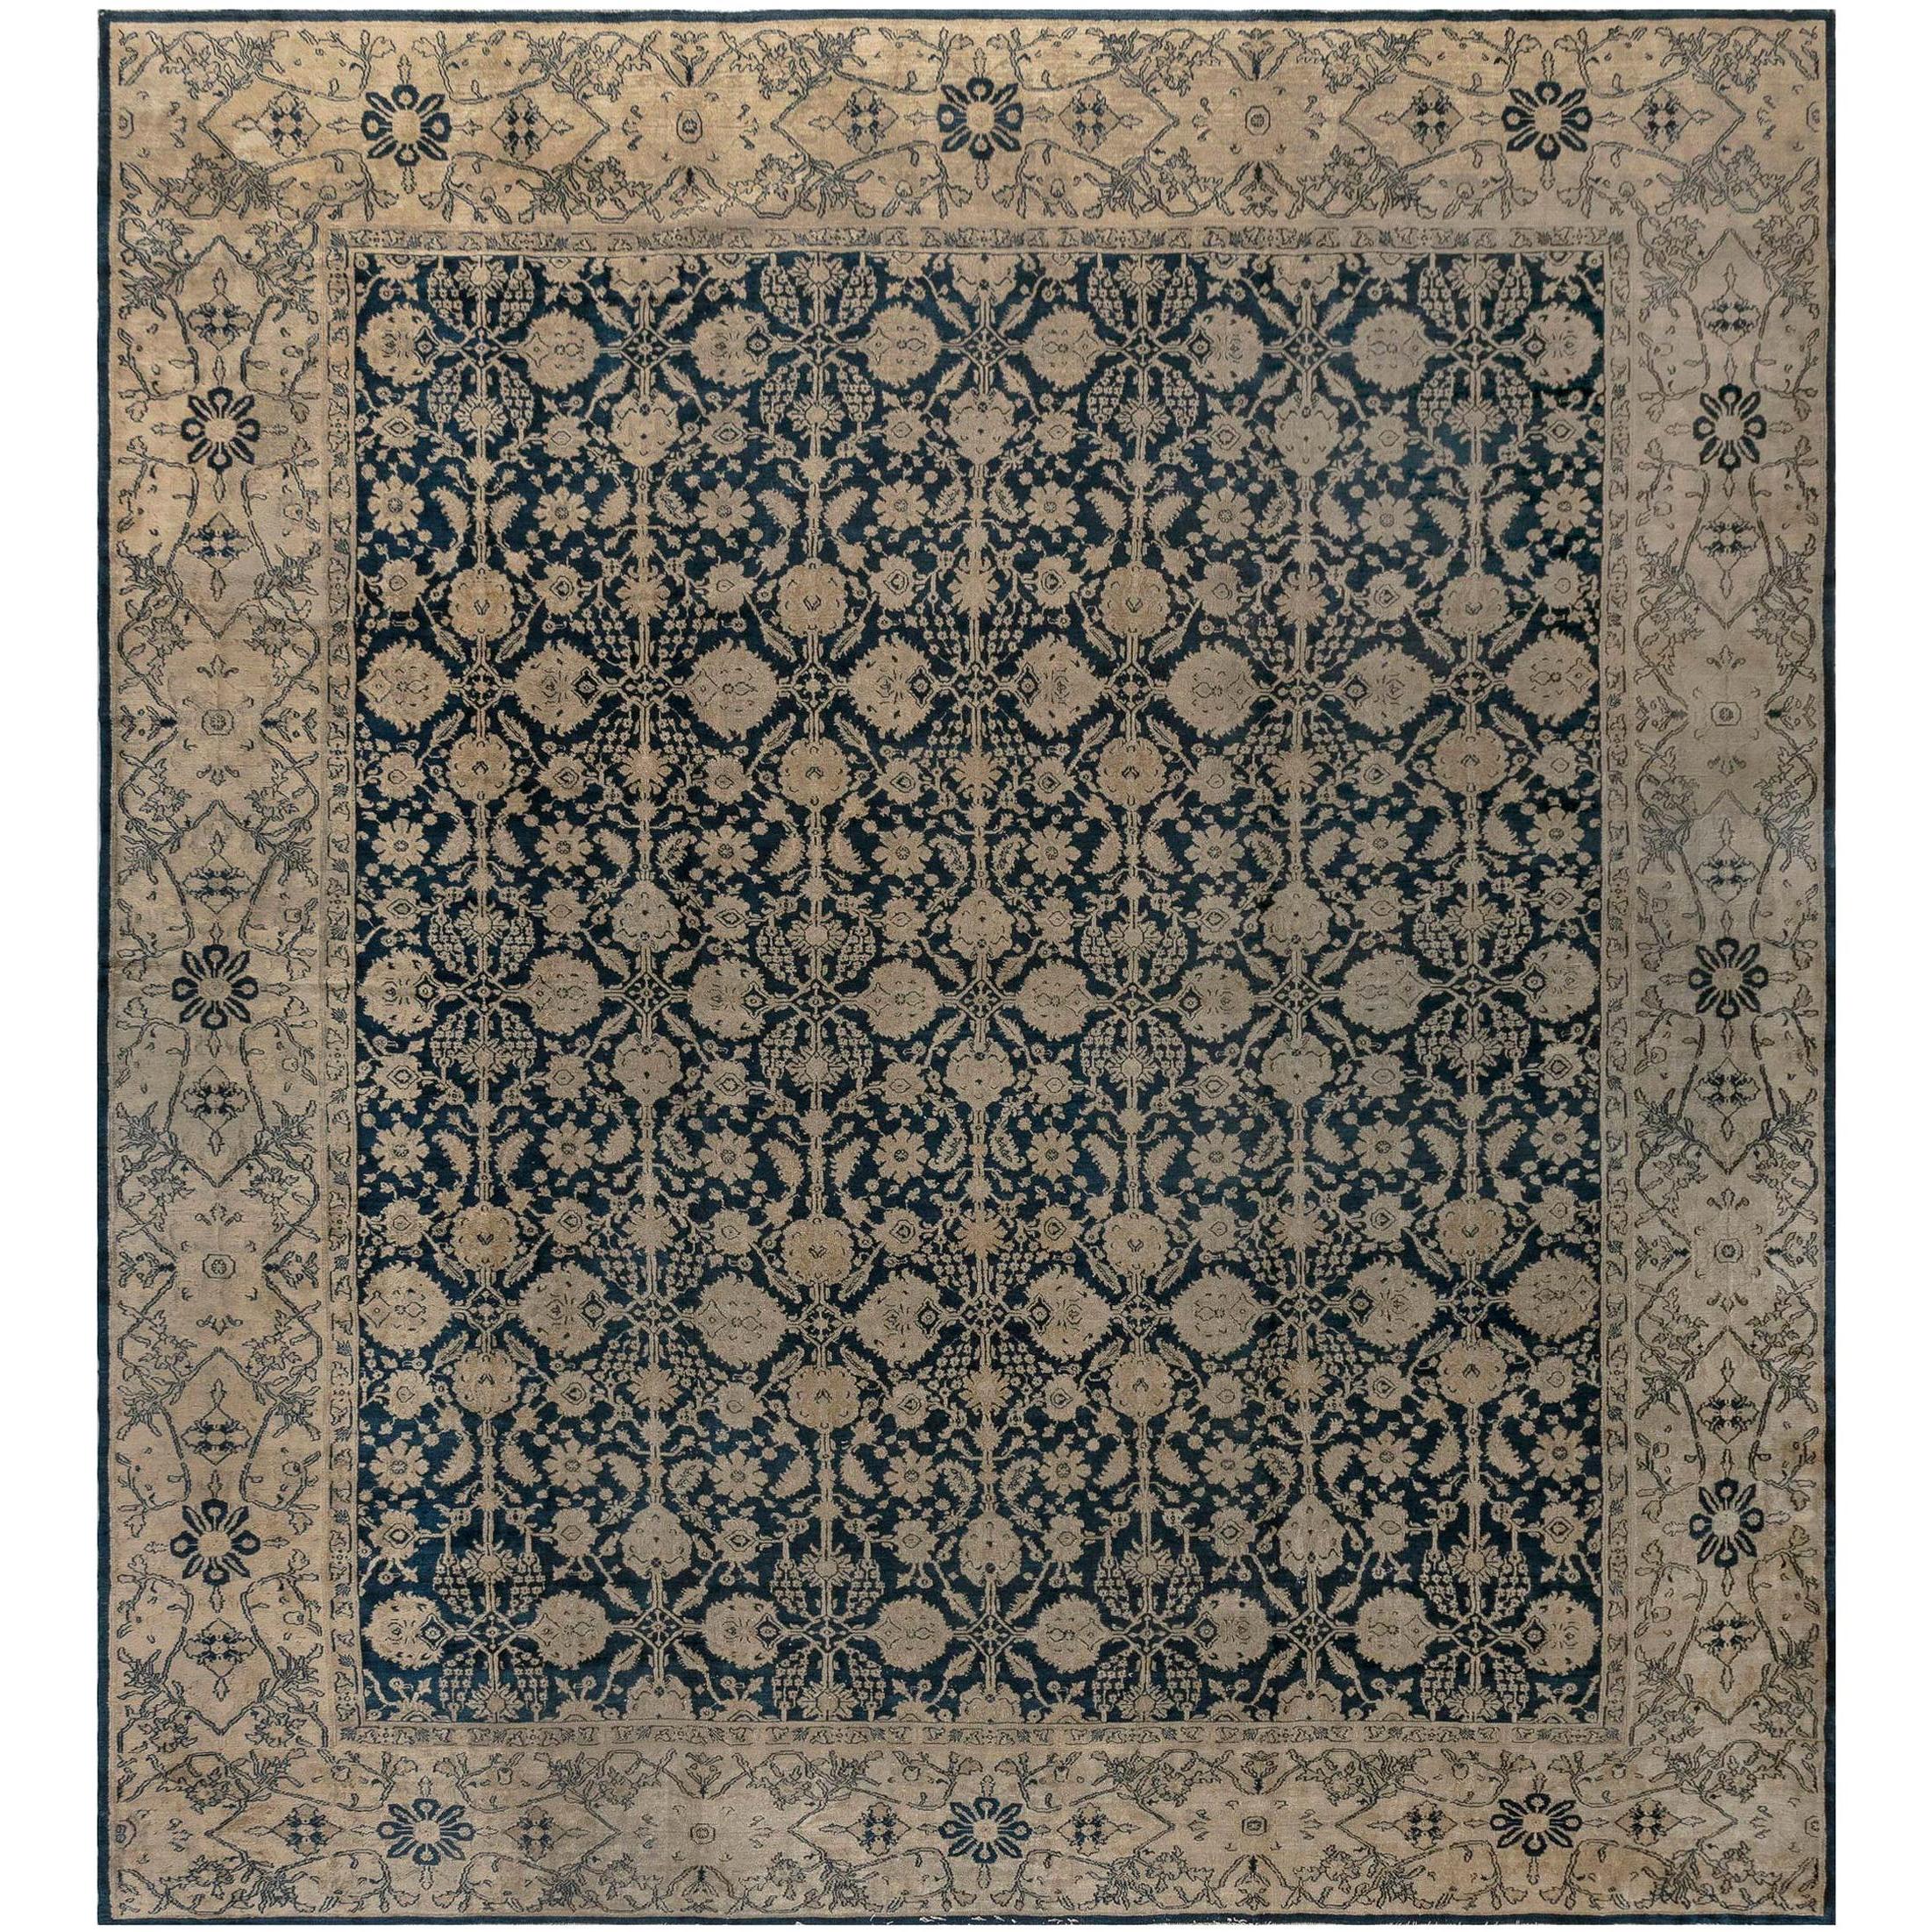 Authentic 19th Century Indian Agra Rug